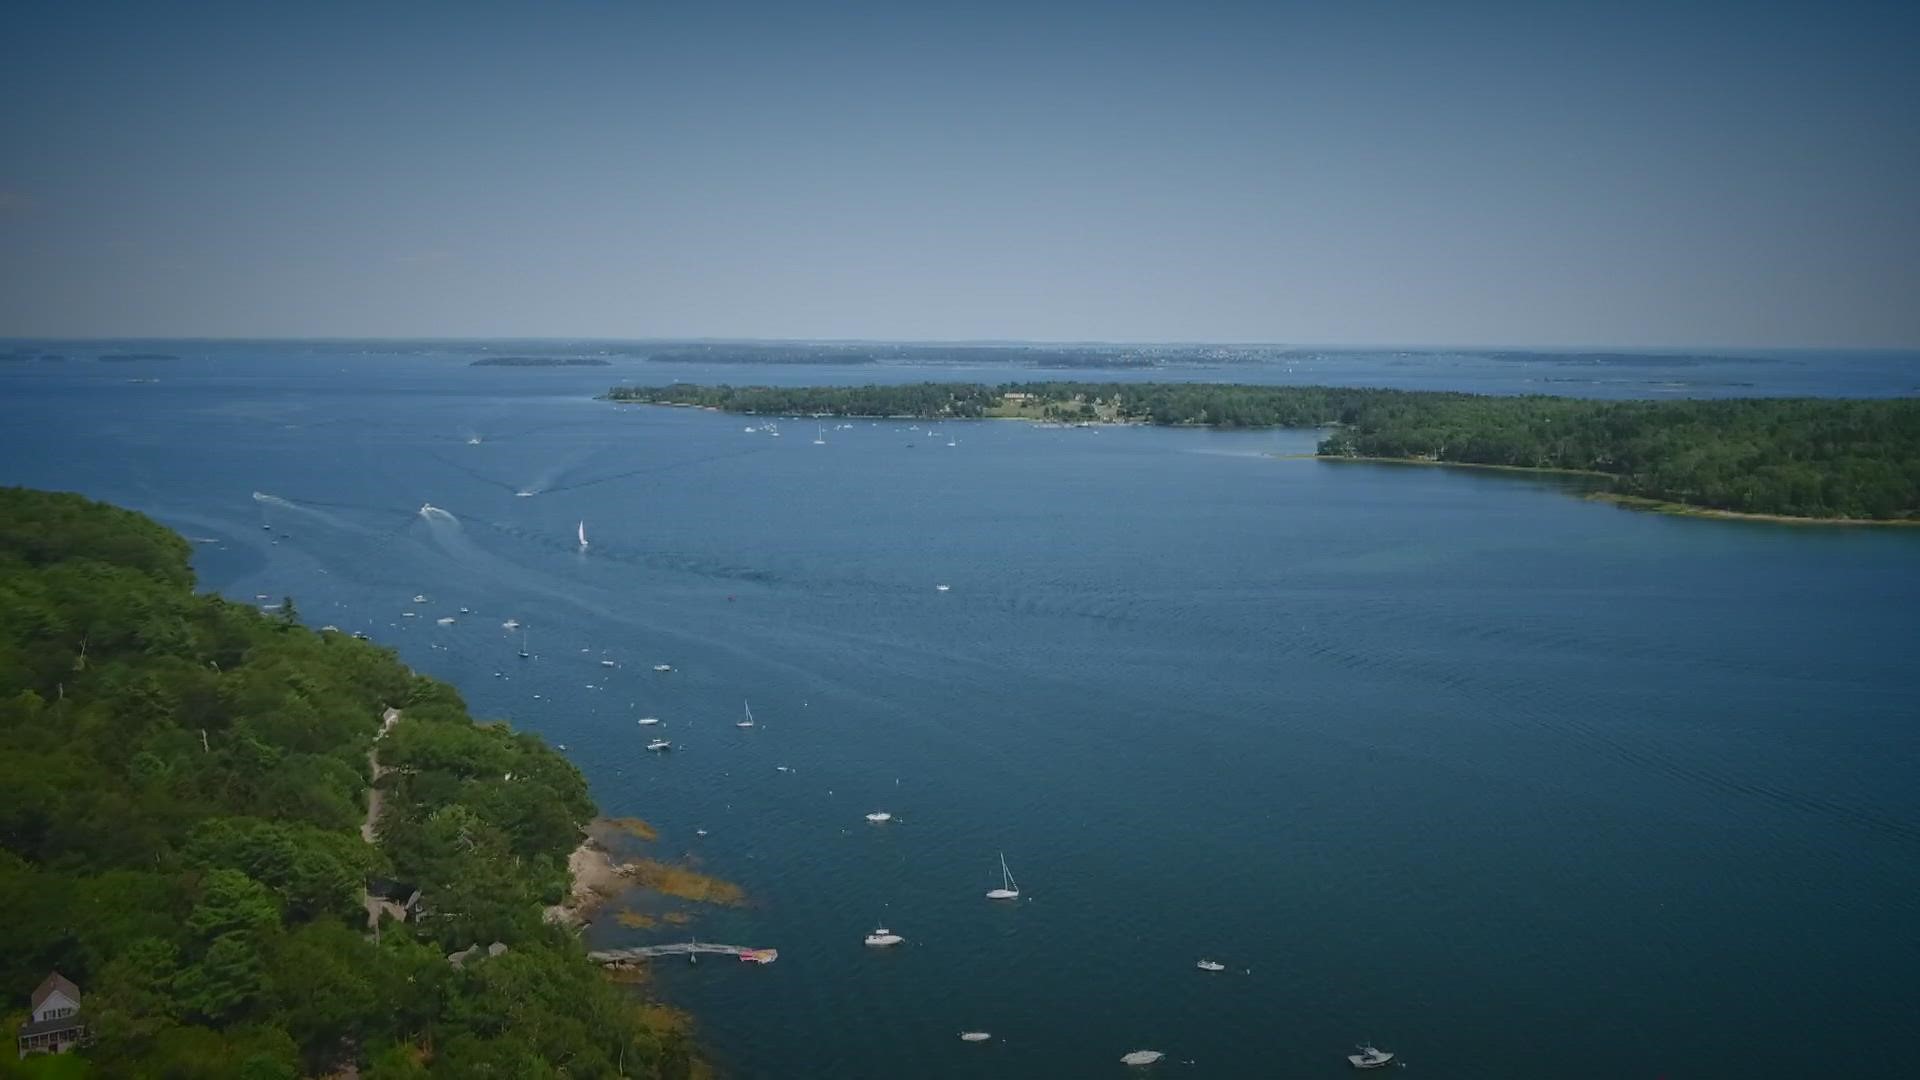 2022 was the 2nd warmest year on record for the waters just off Maine’s coast.